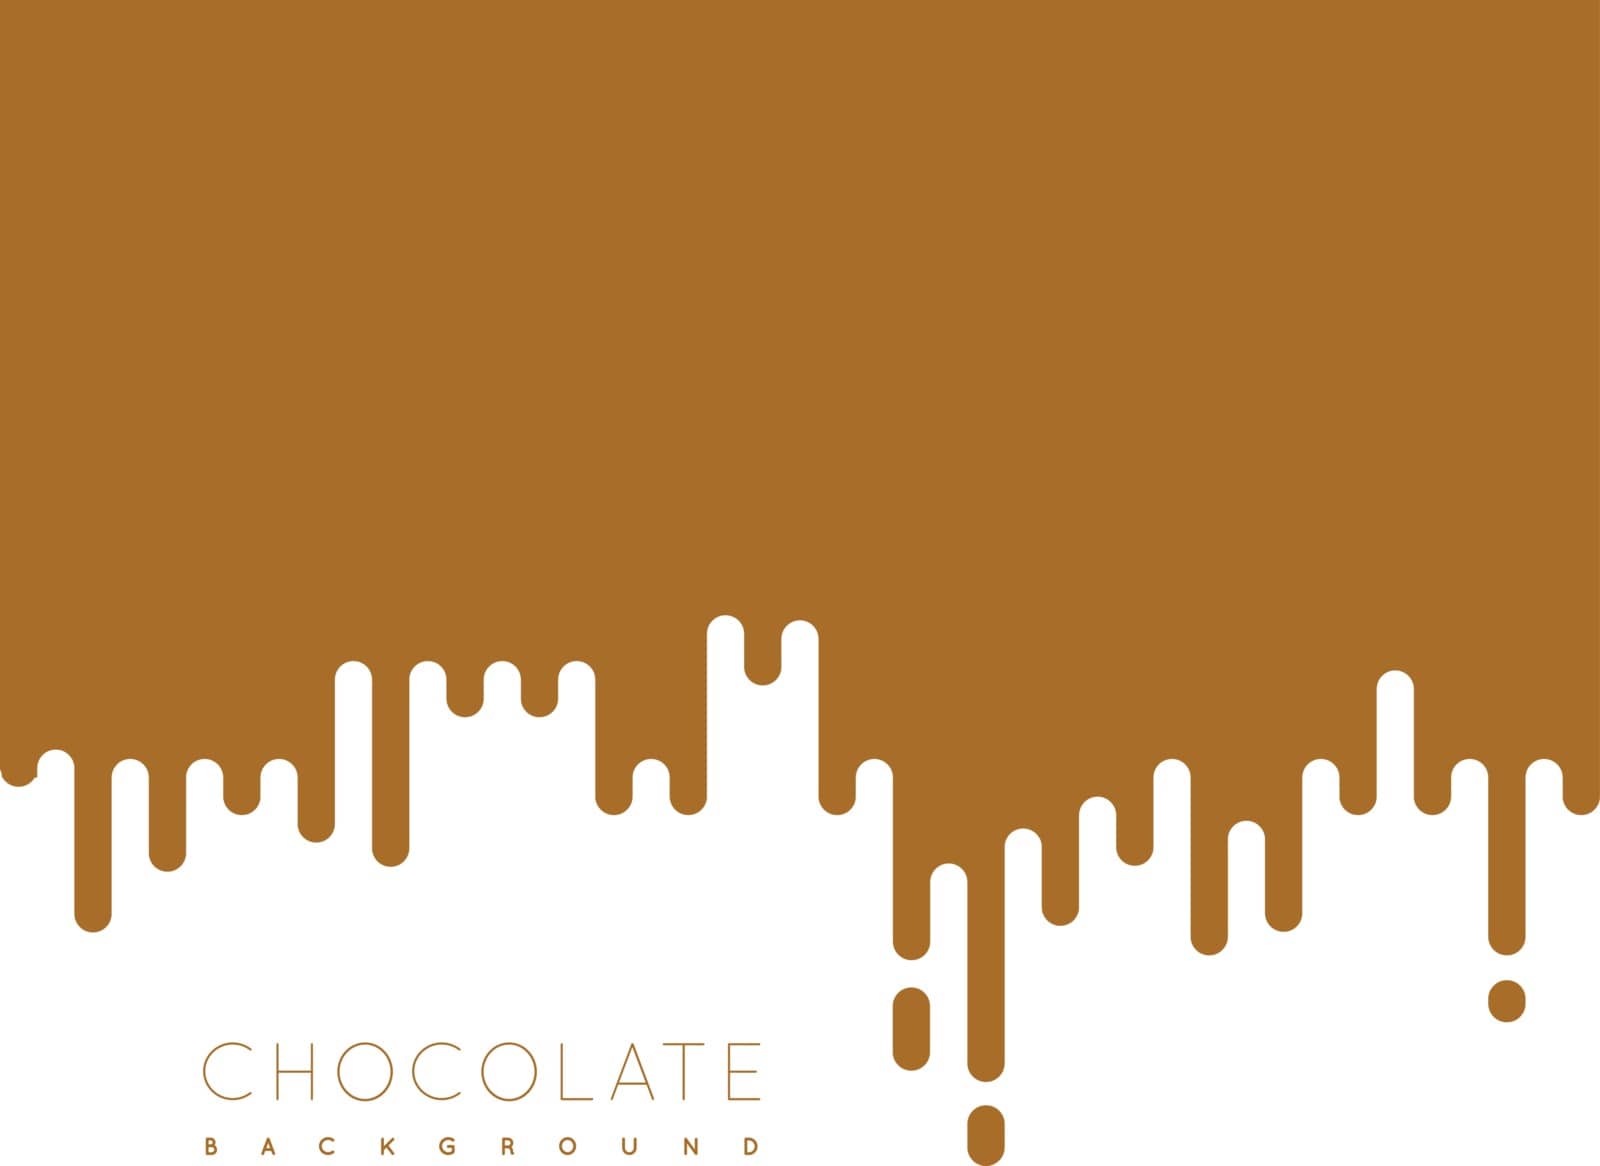 Chocolate irregular rounded lines background by sermax55